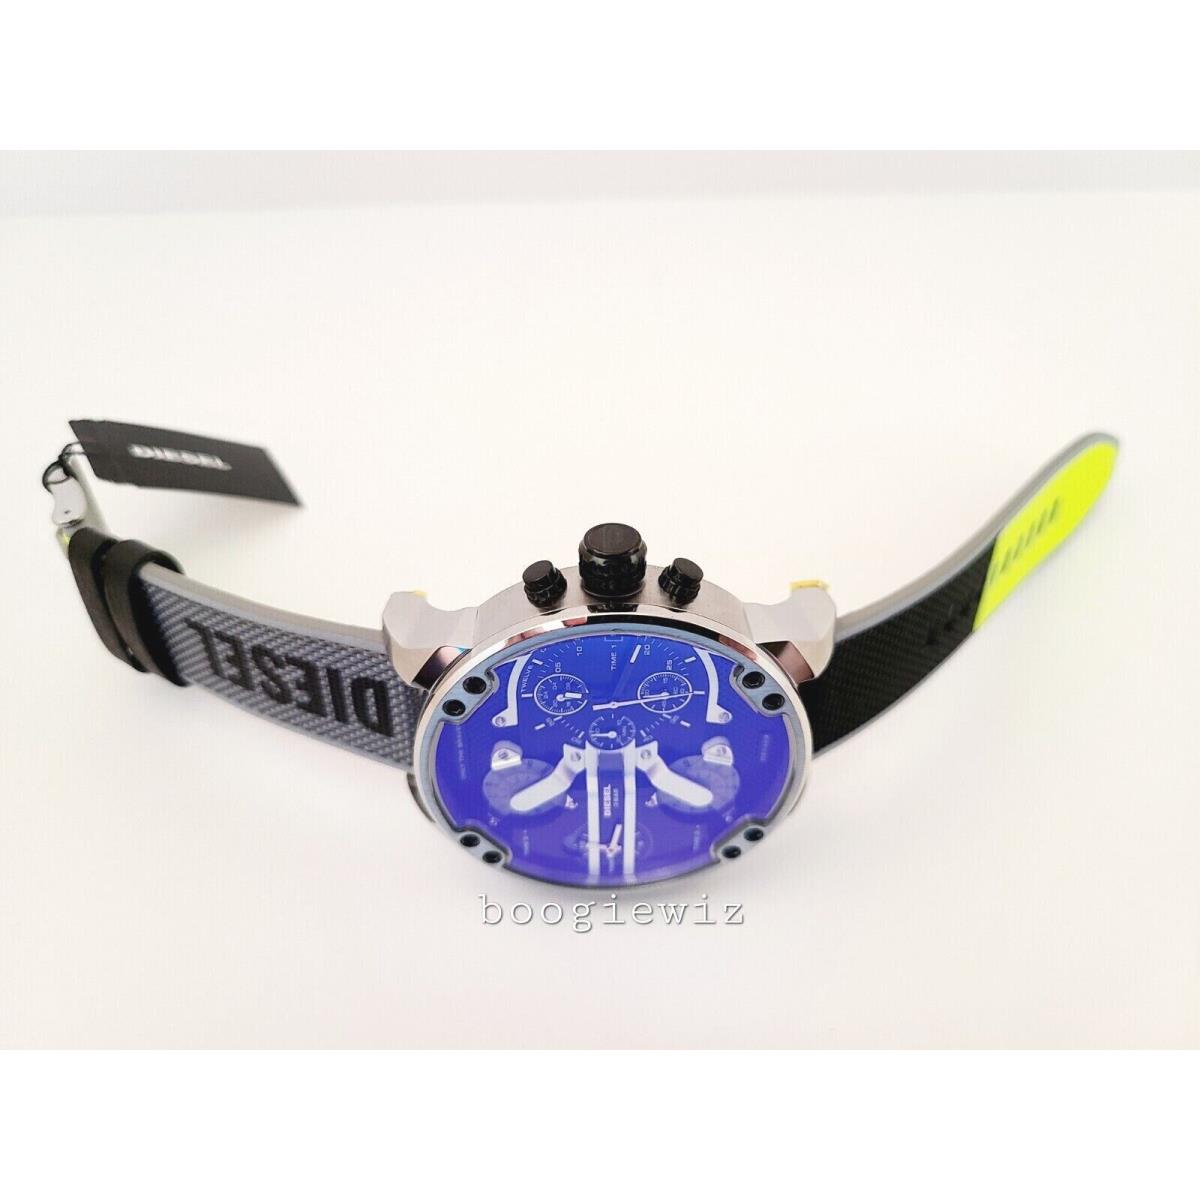 Diesel watch Daddy - Multi color crystal, iridescent blue and yellows Dial, has accent lime color on back, see photo Band, Black and stainless Bezel 2